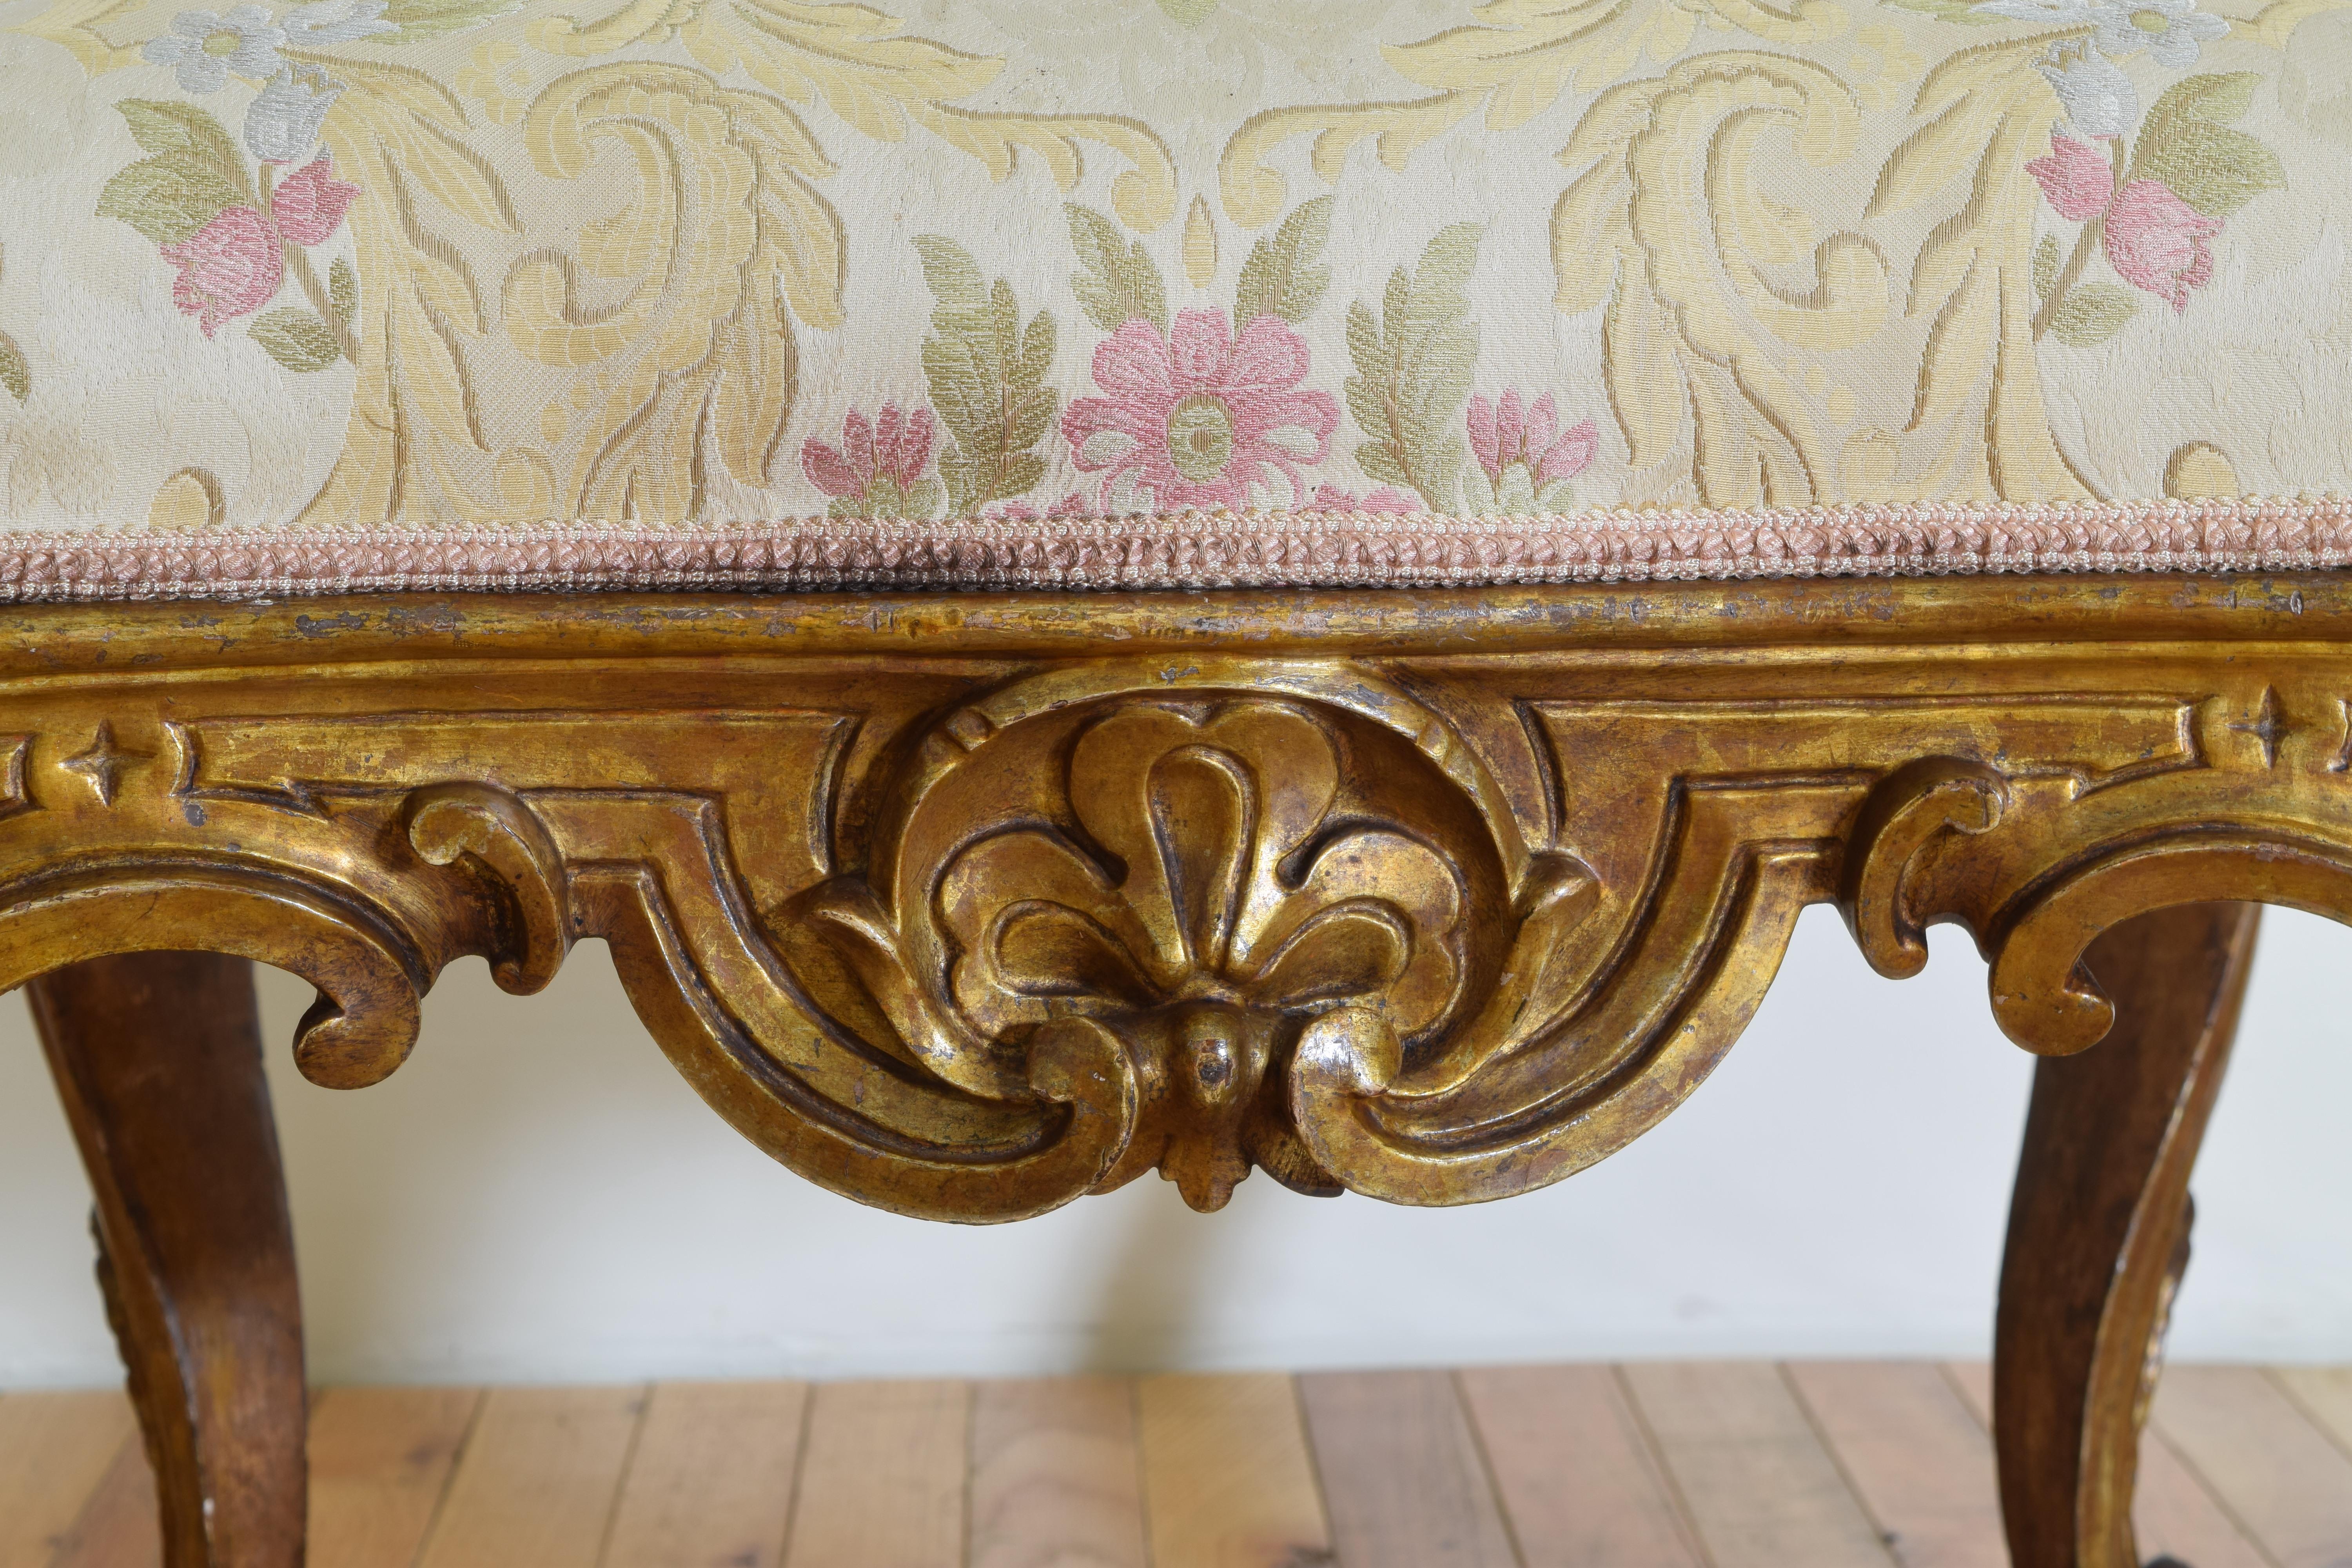 Italian Rococo Revival Carved Giltwood Bench, 3rd Quarter 19th Century For Sale 4